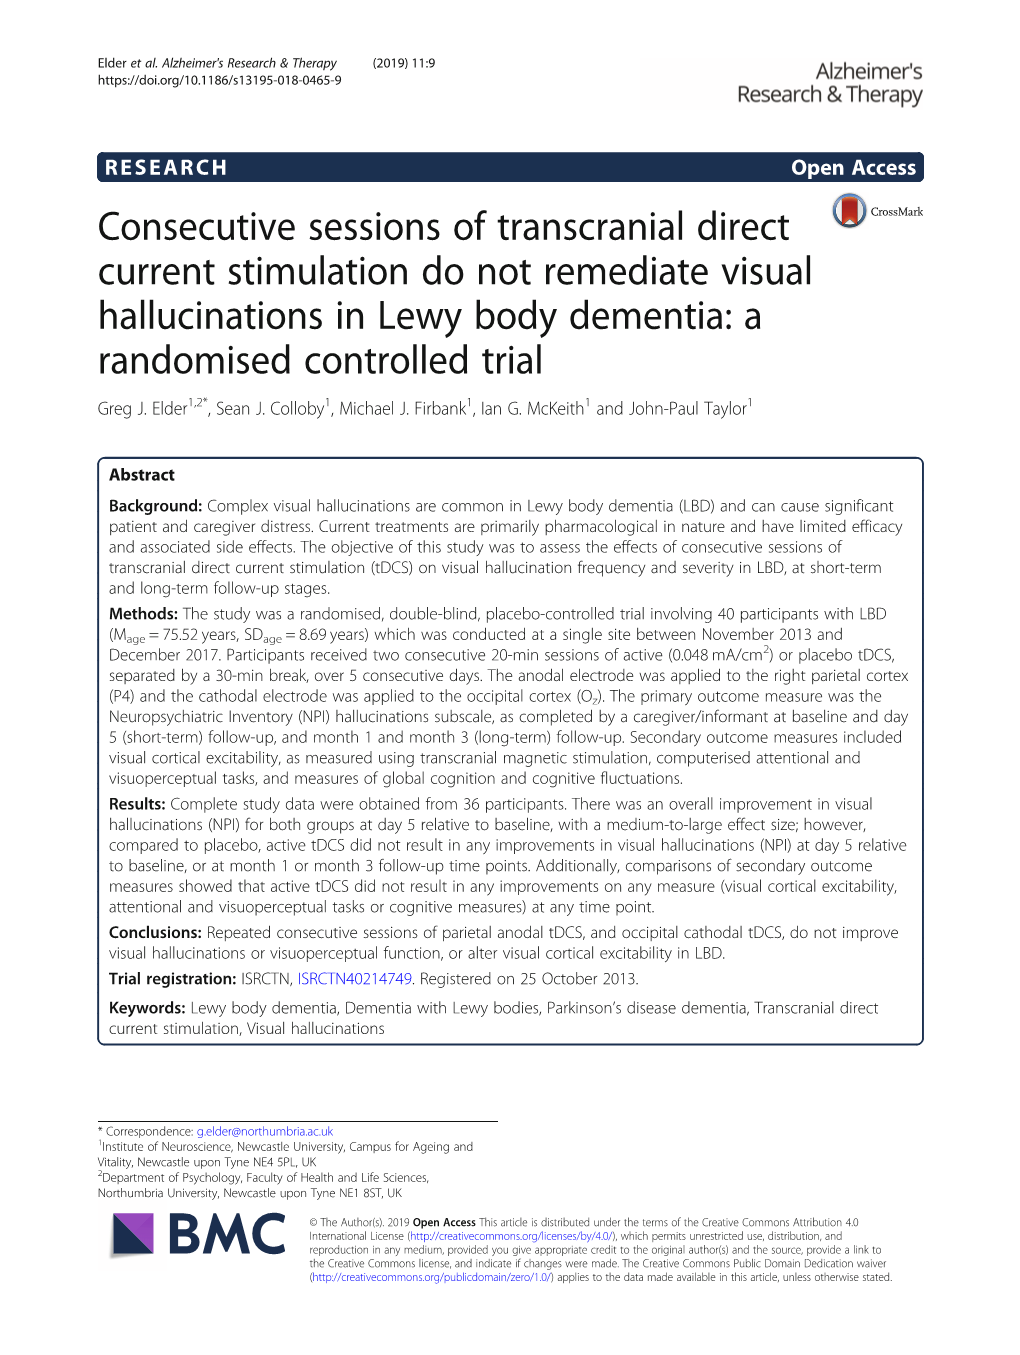 Consecutive Sessions of Transcranial Direct Current Stimulation Do Not Remediate Visual Hallucinations in Lewy Body Dementia: a Randomised Controlled Trial Greg J